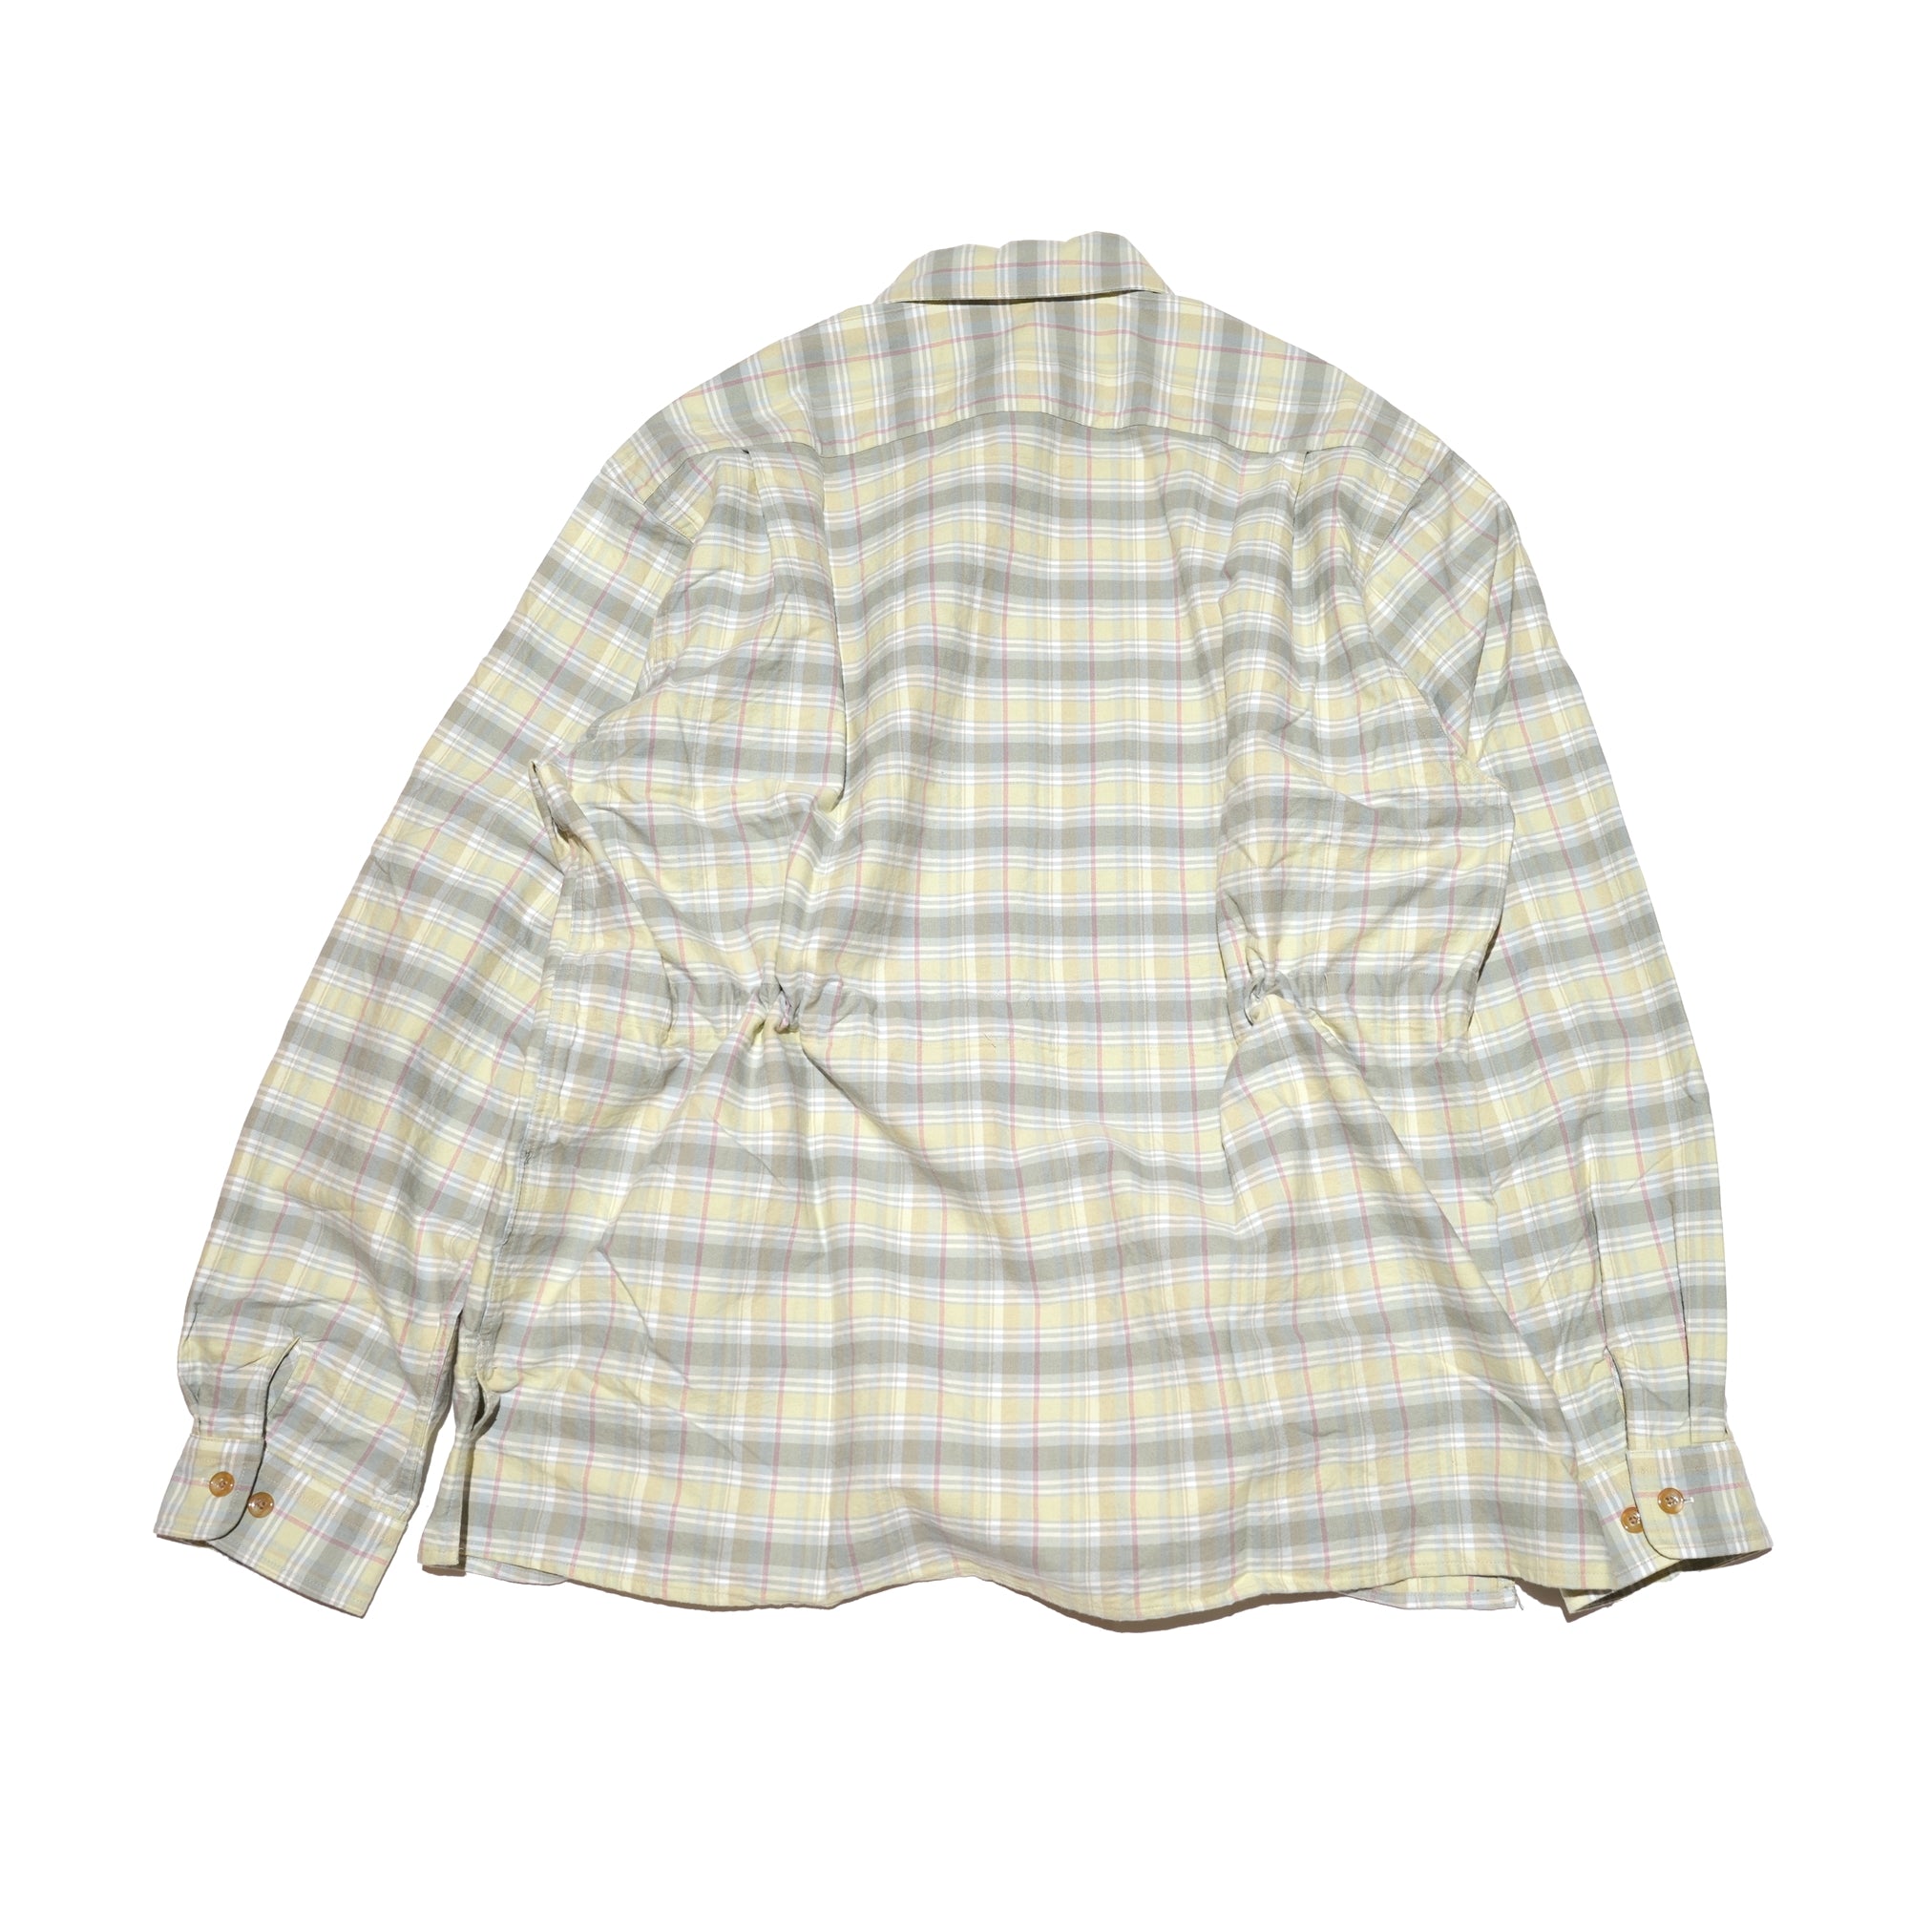 Name: E-Z GOING SHIRTS | Color:Pistachio Plaid | Size:Regular/Tall 【CITYLIGHTS PRODUCTS_シティライツプロダクツ】